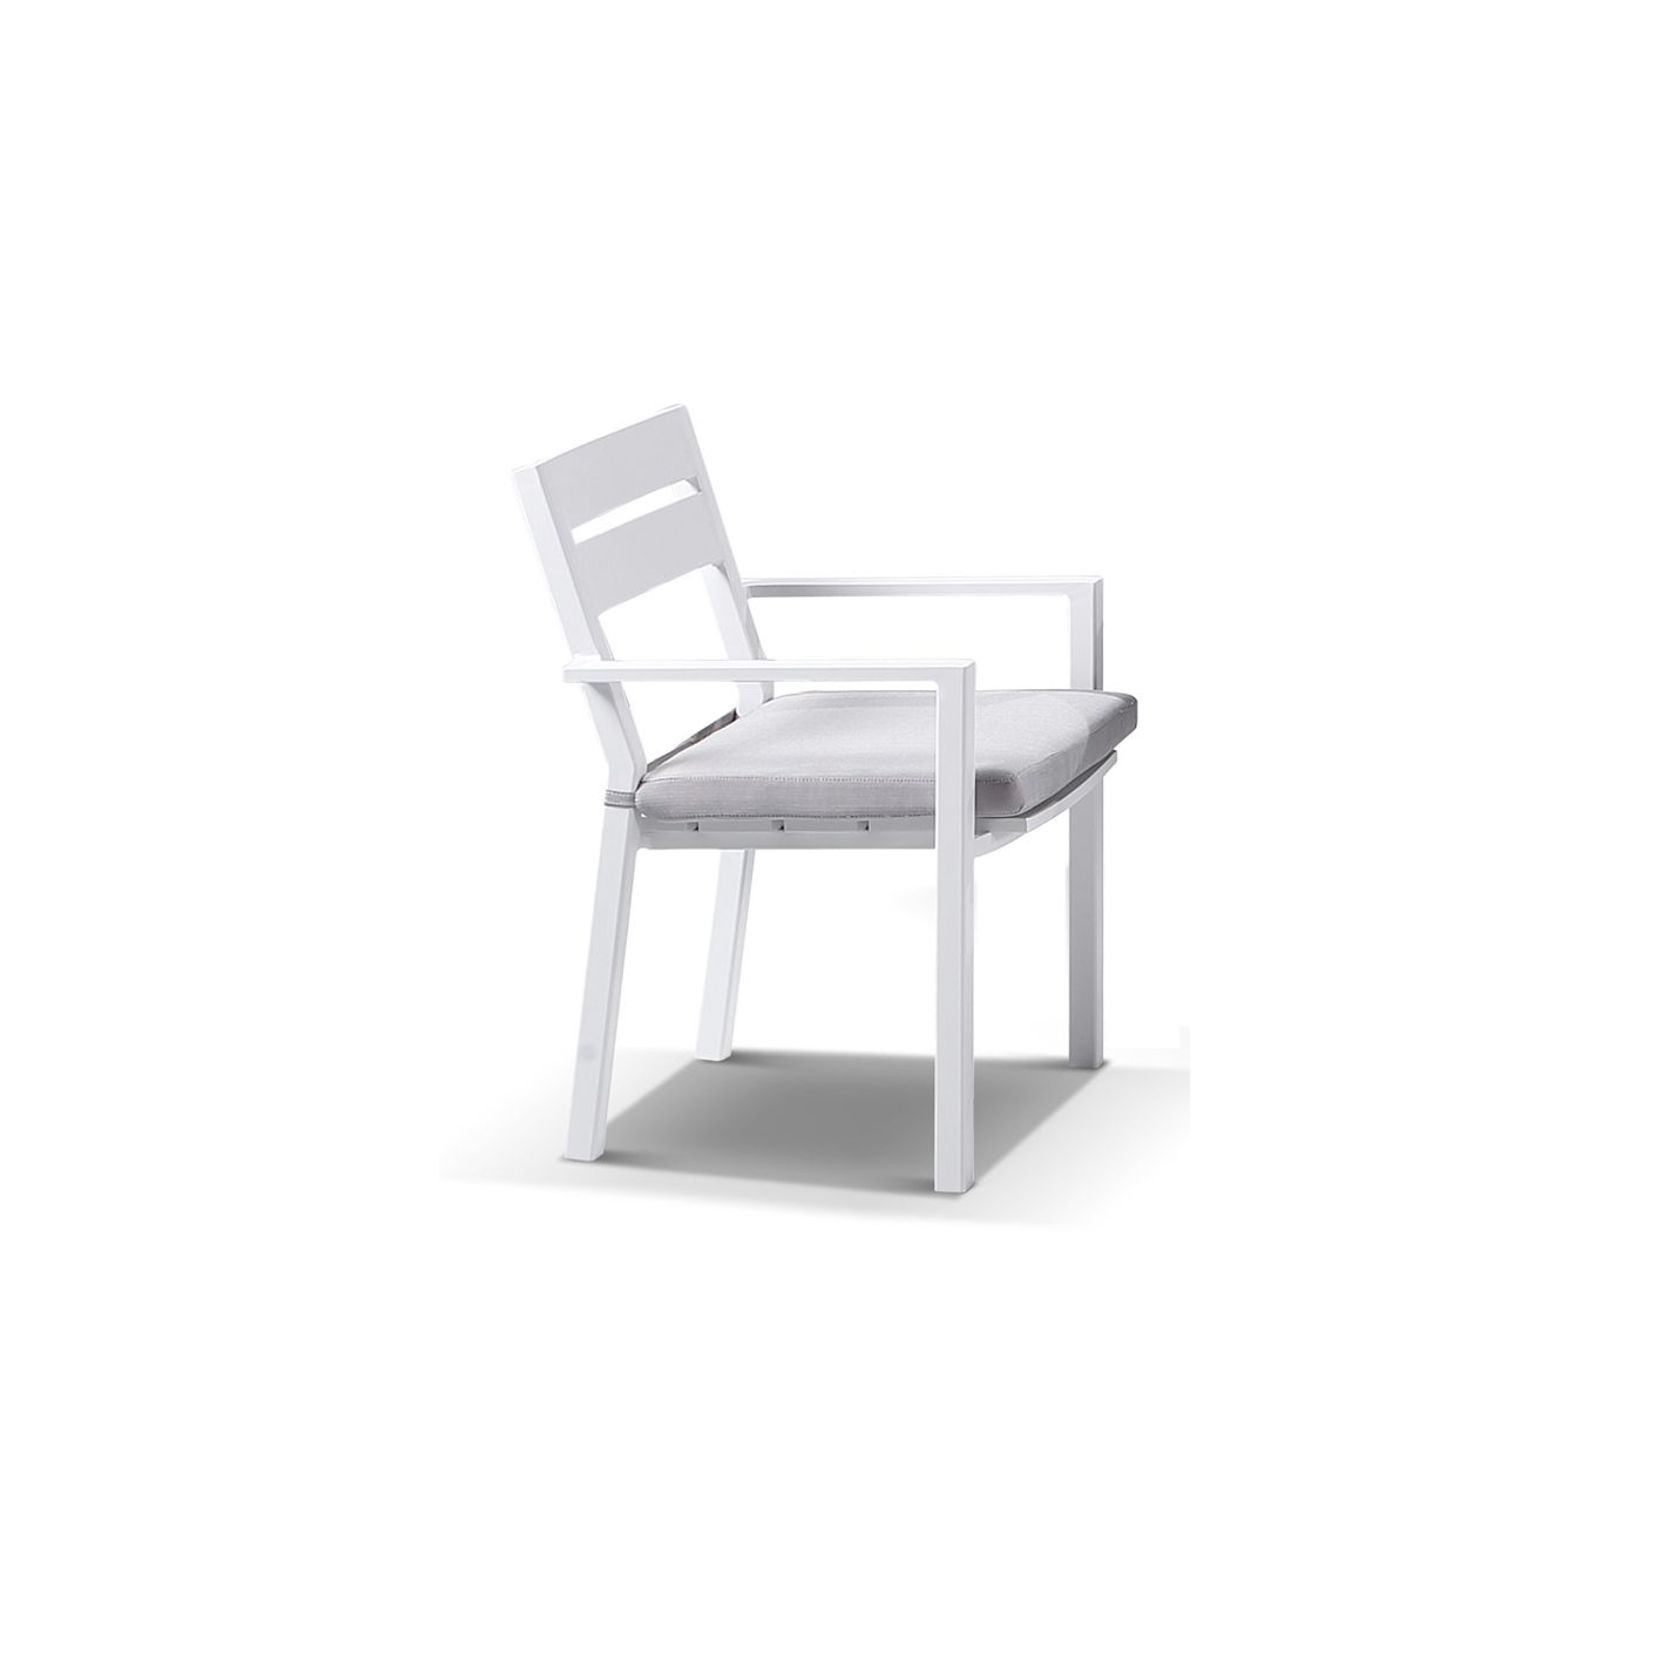 Austin 2.2m - 3m Table with 10 Santorini Dining Chairs gallery detail image